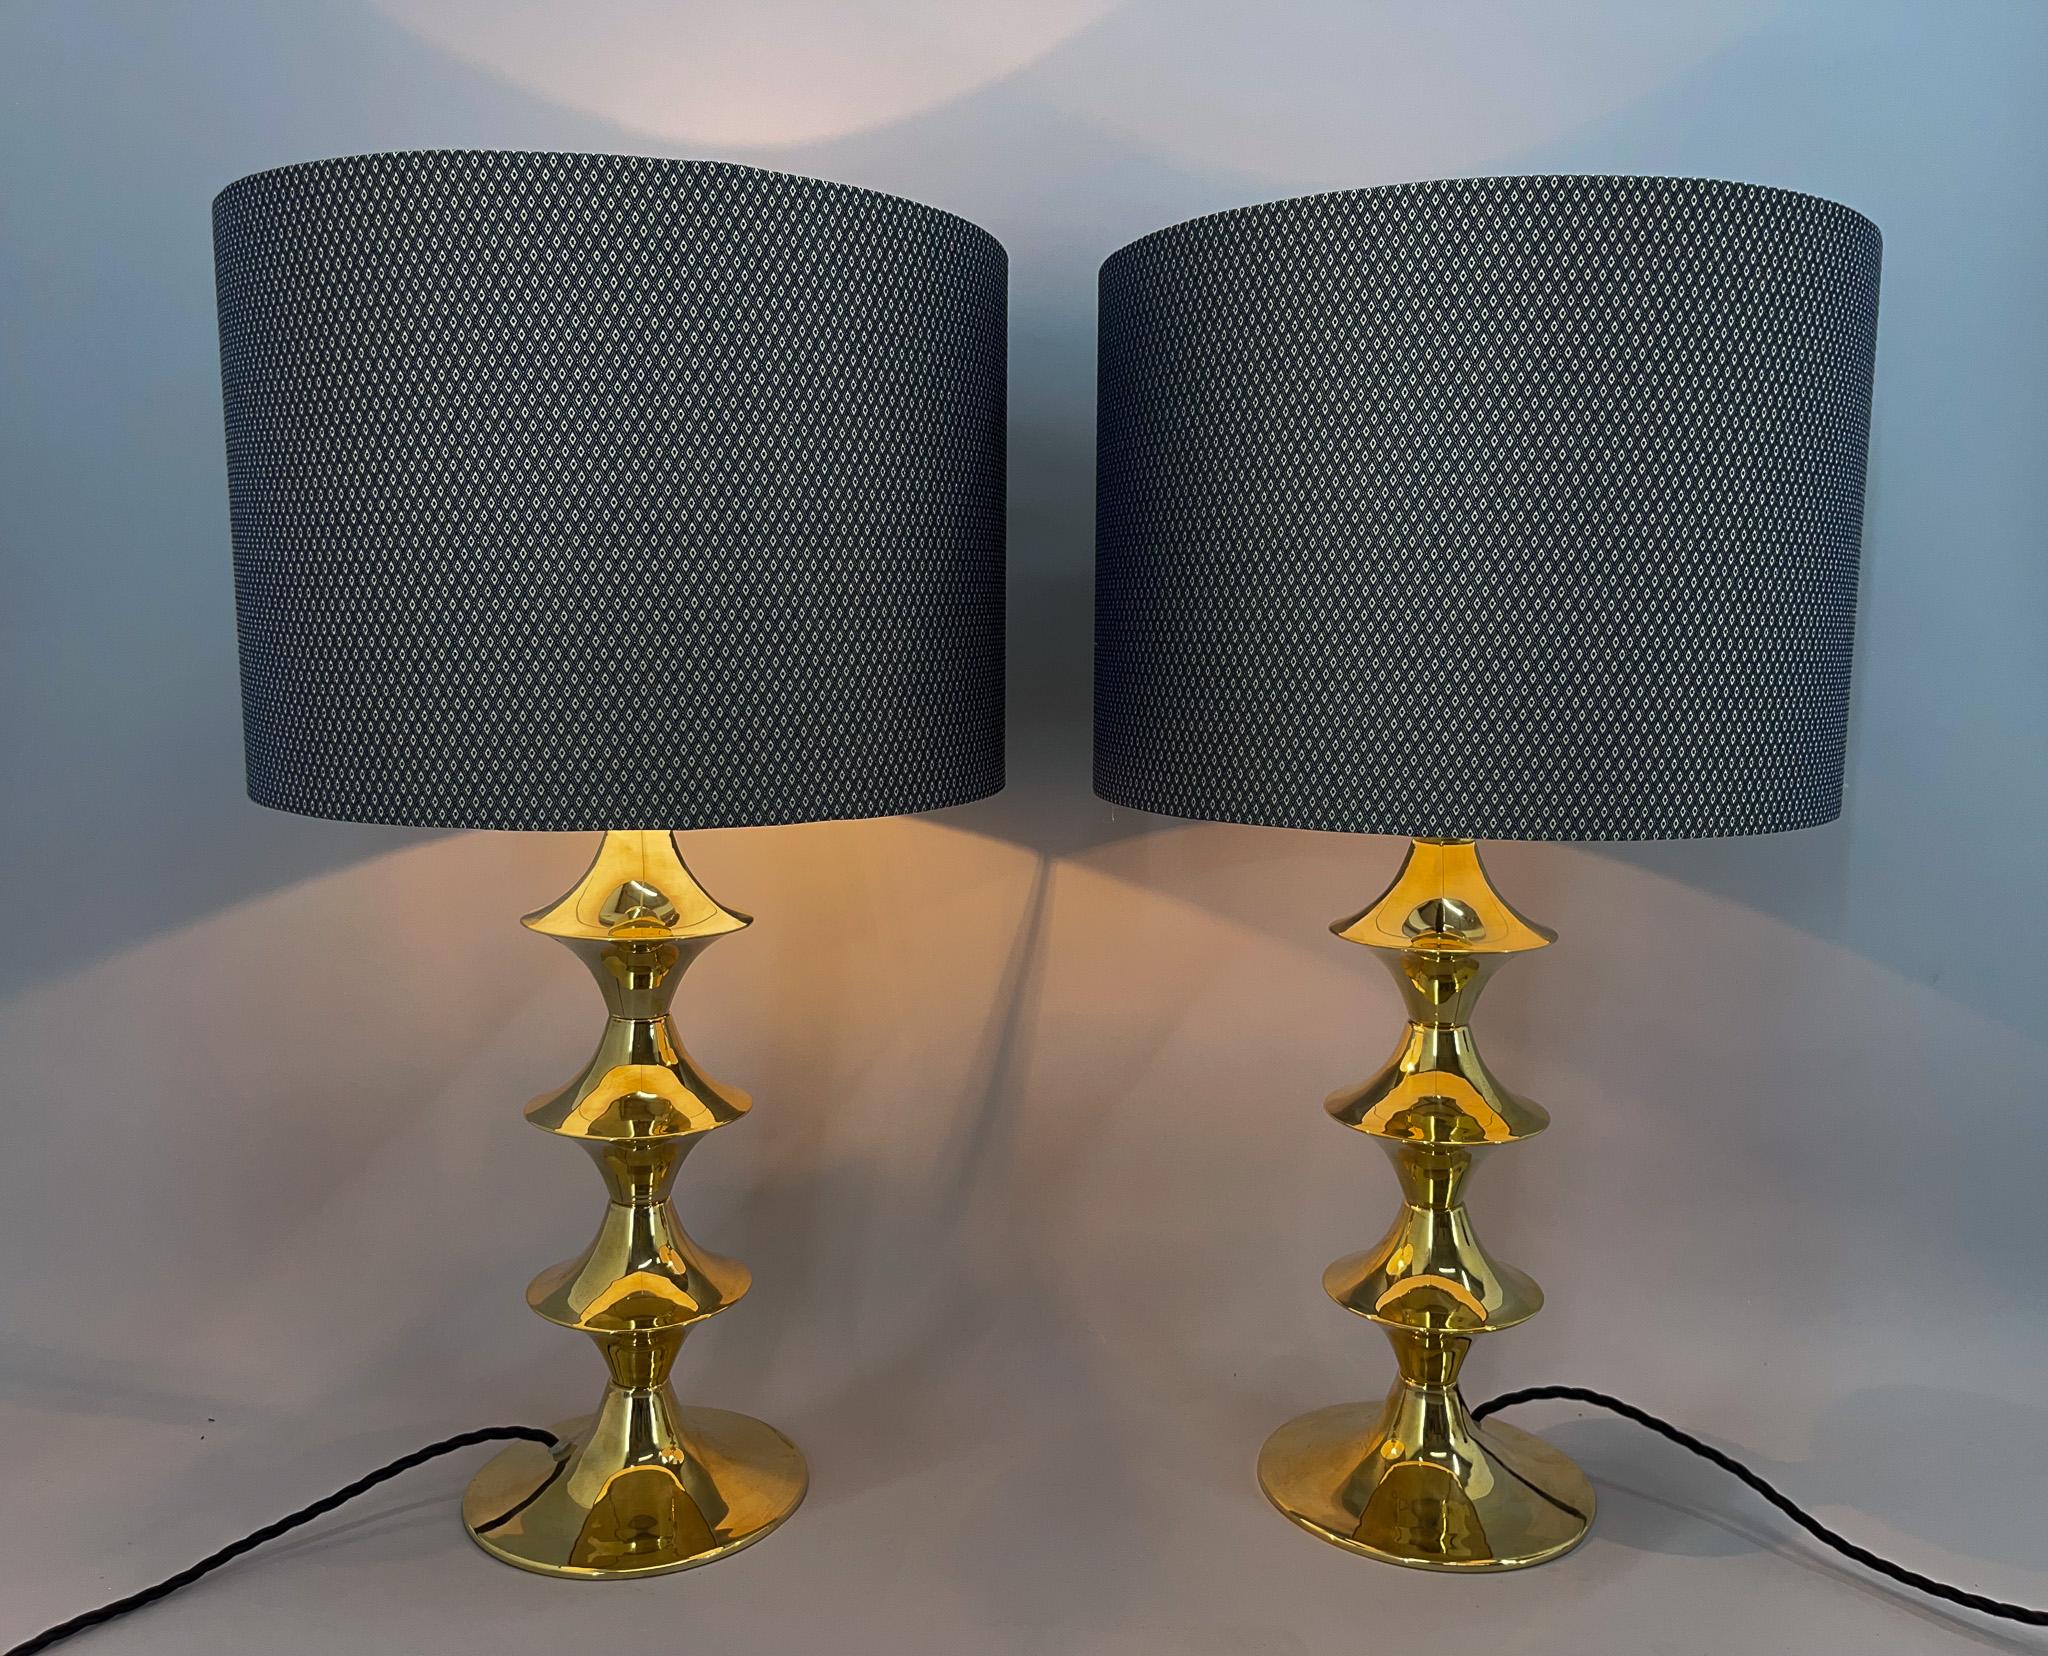 Pair of Mid-Century Brass Table Lamps, 1950s, Restored 1